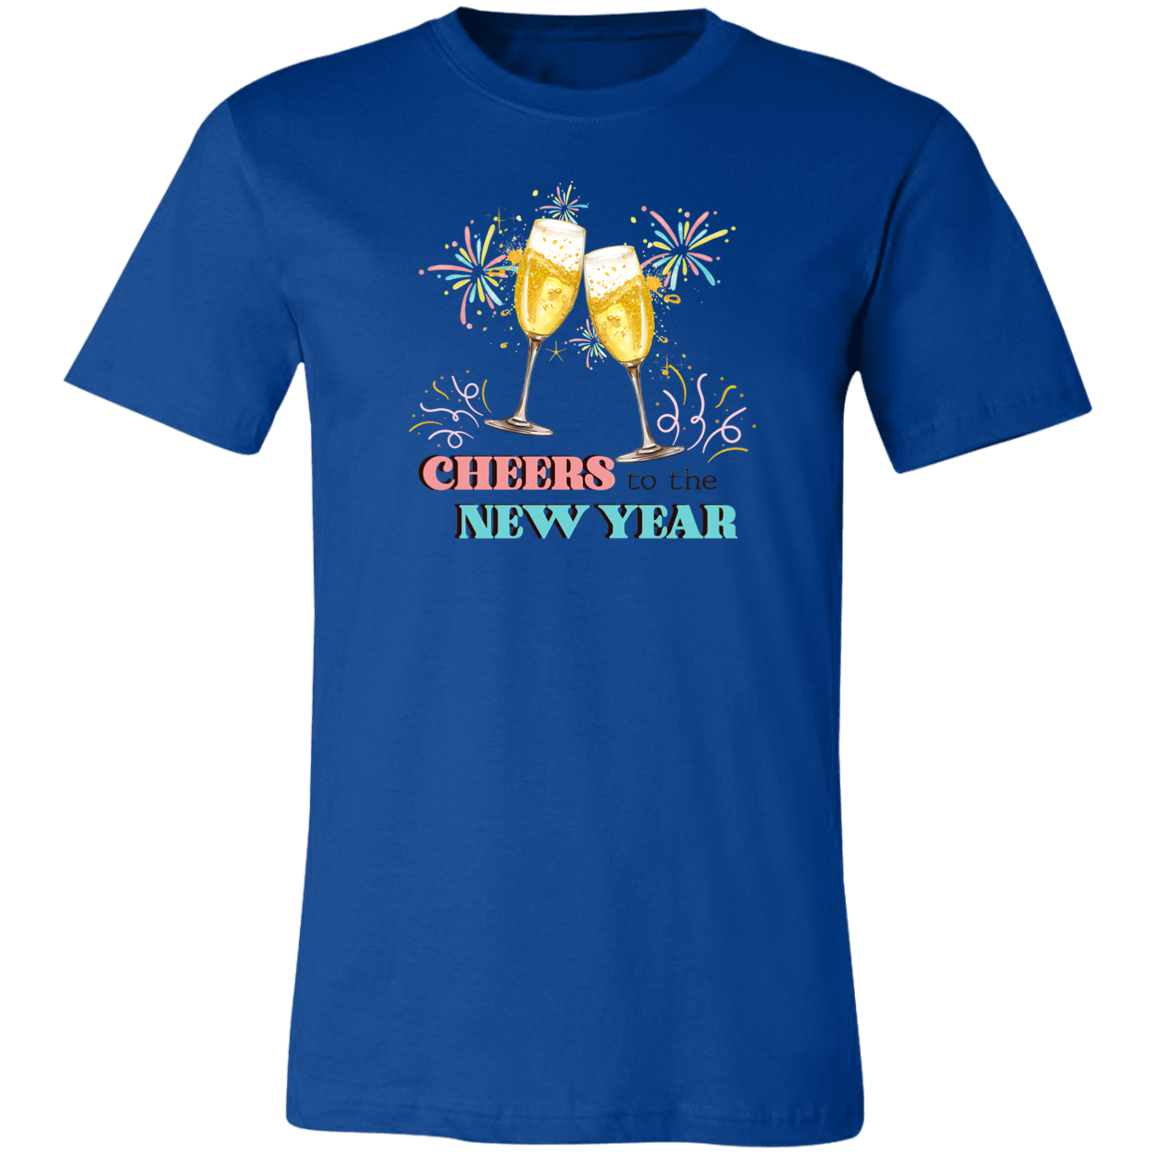 Cheers To The New Year Shirt